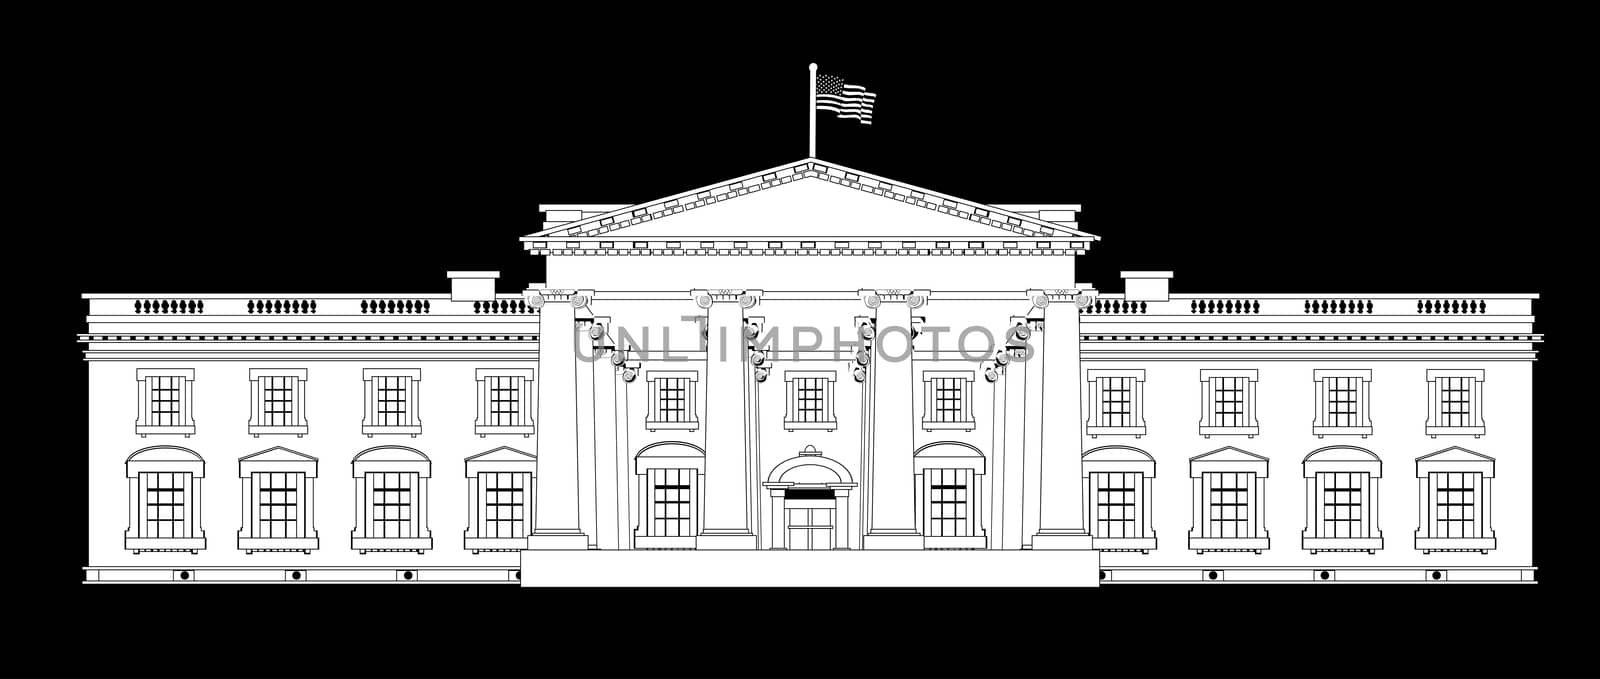 Depiction of the White House home to the United States President over a black background